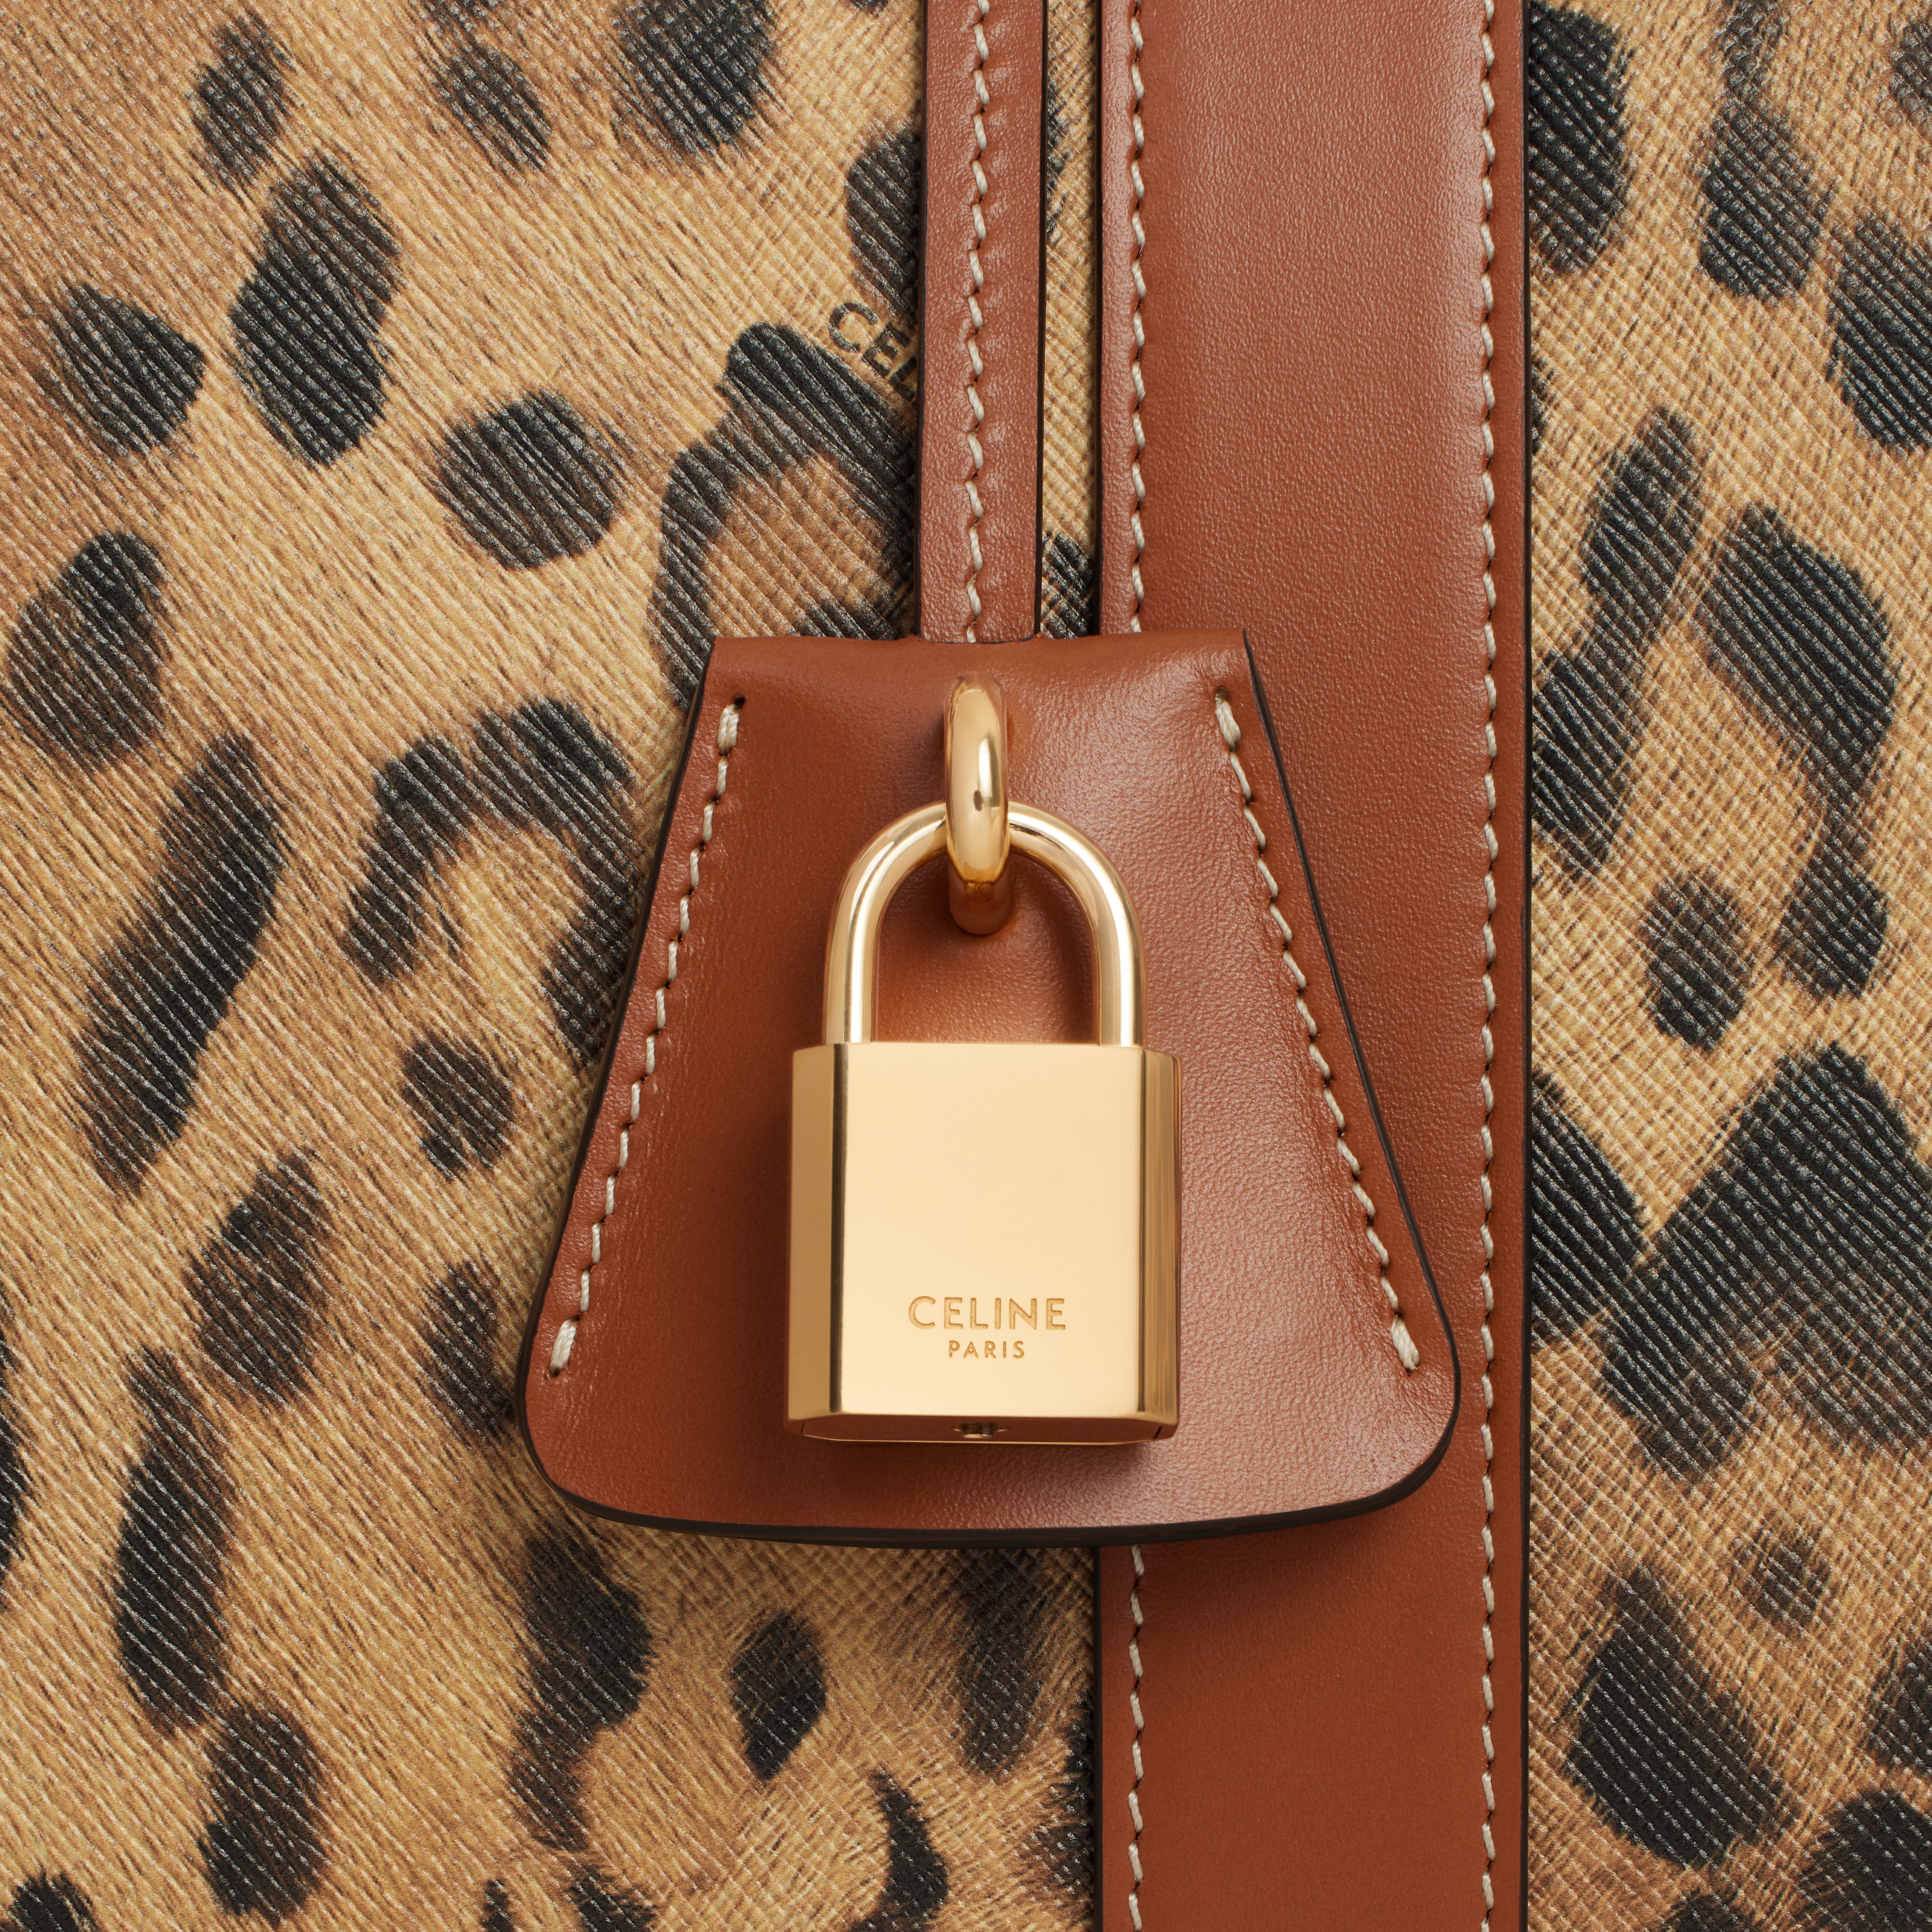 Medium Travel Bag in Celine canvas with leopard print - 4